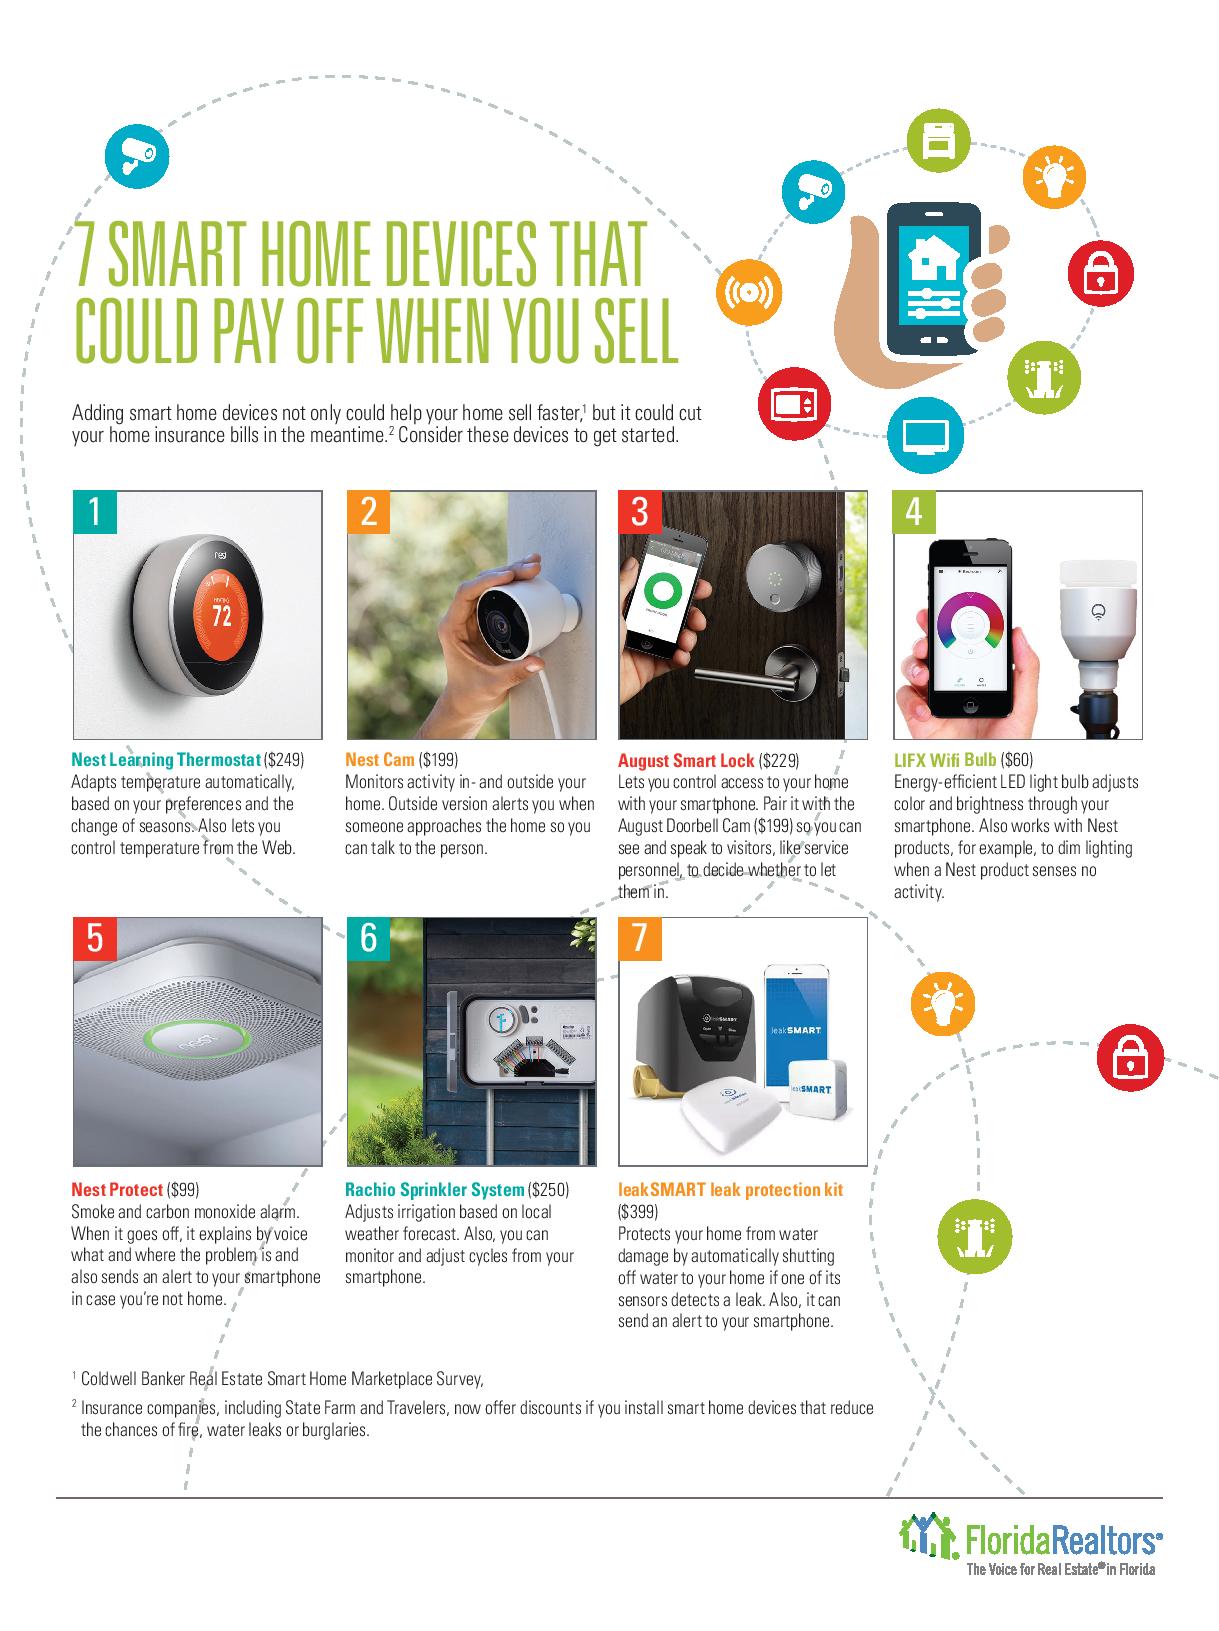 7 Smart Home Devices That Could Pay Off When You Sell